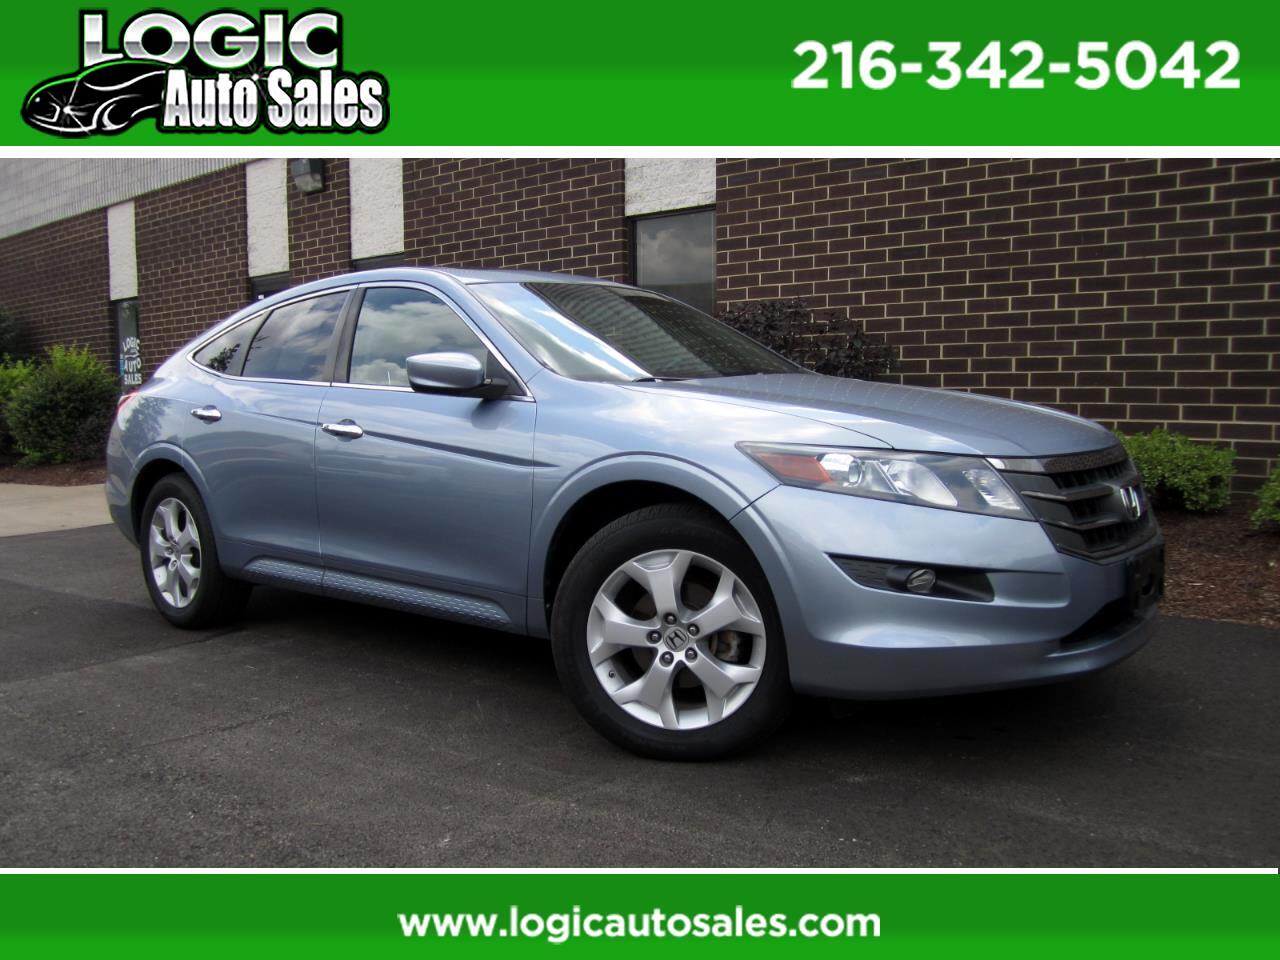 Used 2010 Honda Accord Crosstour 2wd 5dr Ex L For Sale In